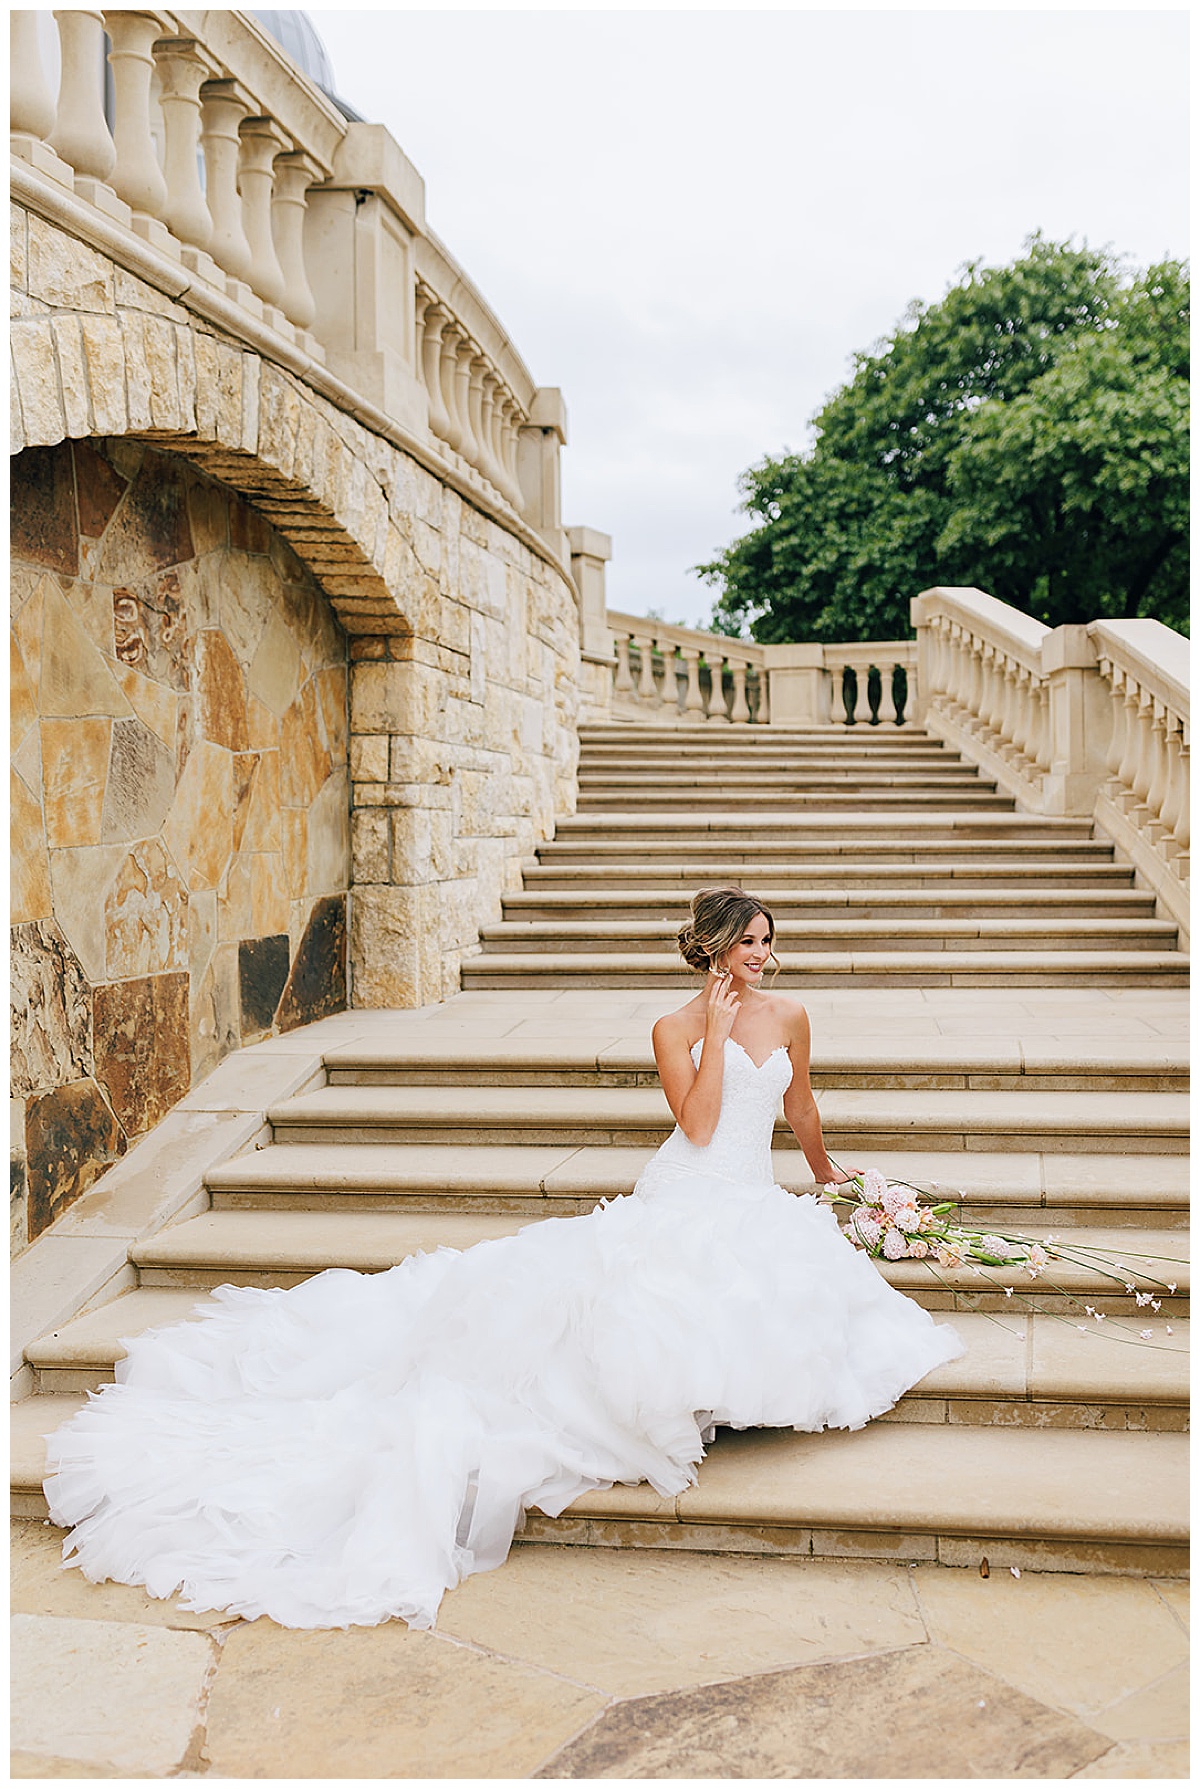 Lady sits on the stairs for perfectly executed Wedding Photography Timeline